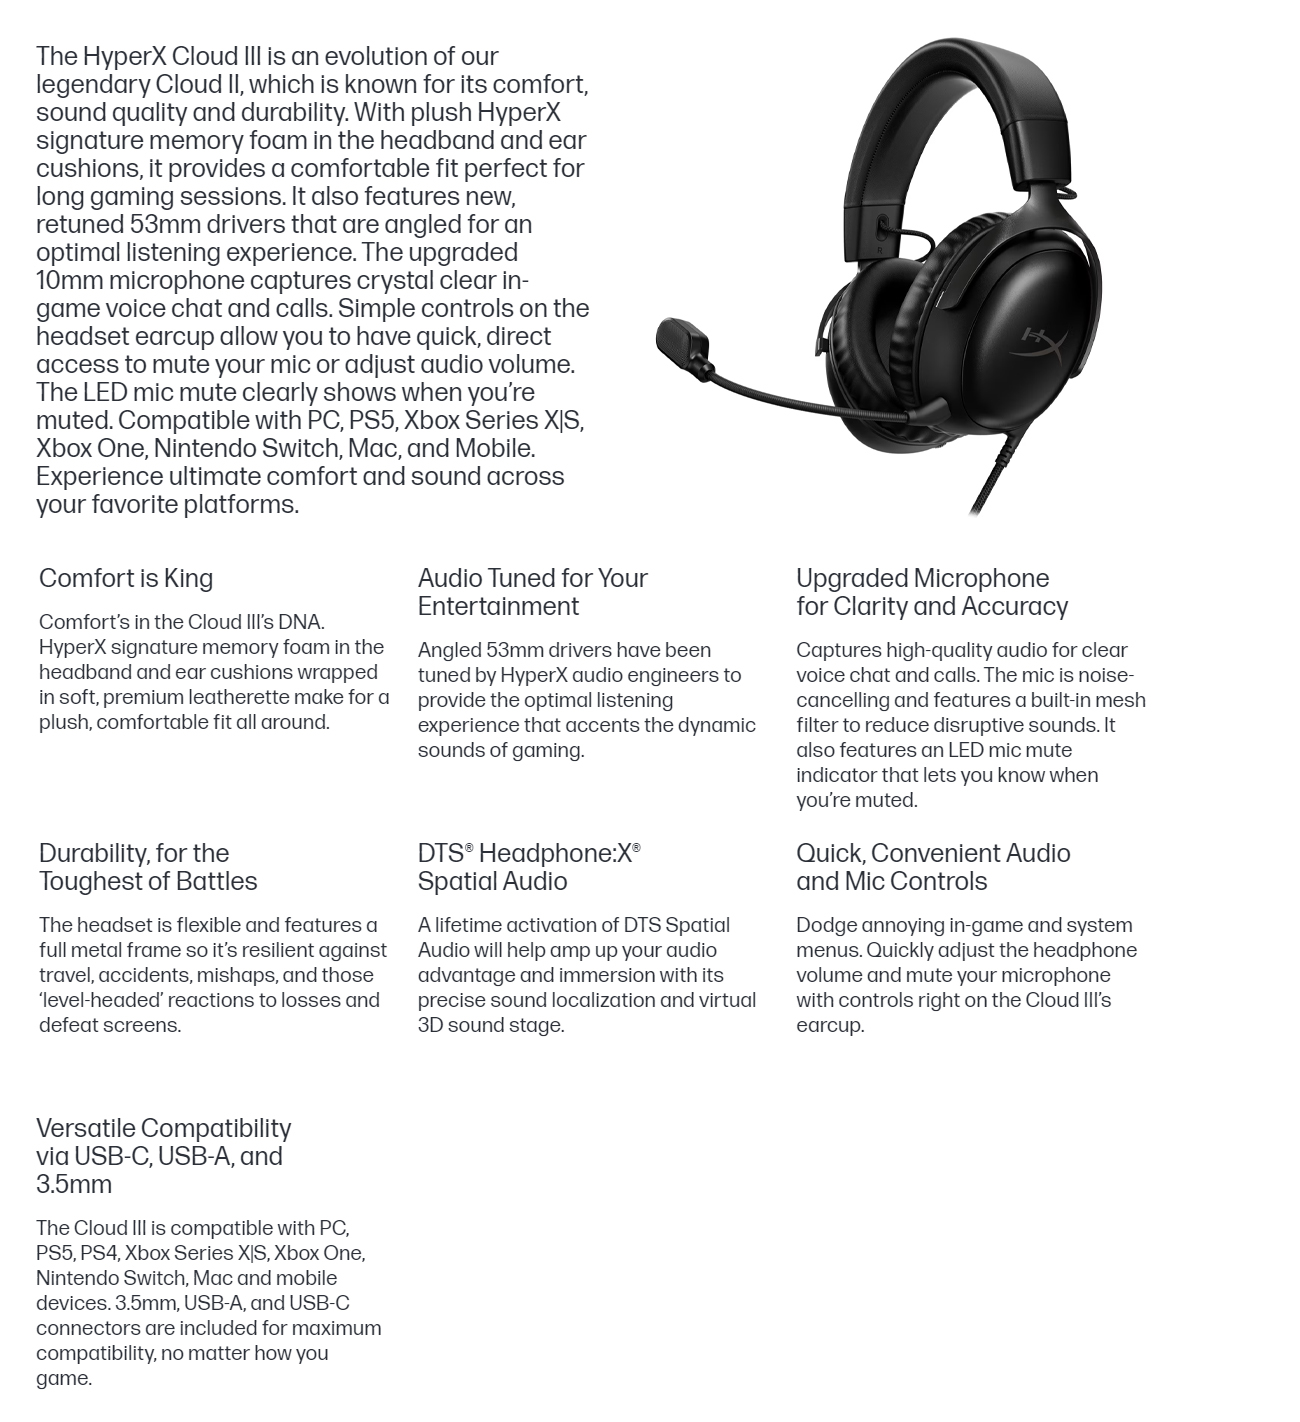 A large marketing image providing additional information about the product HyperX Cloud III - Wired Gaming Headset (Black) - Additional alt info not provided